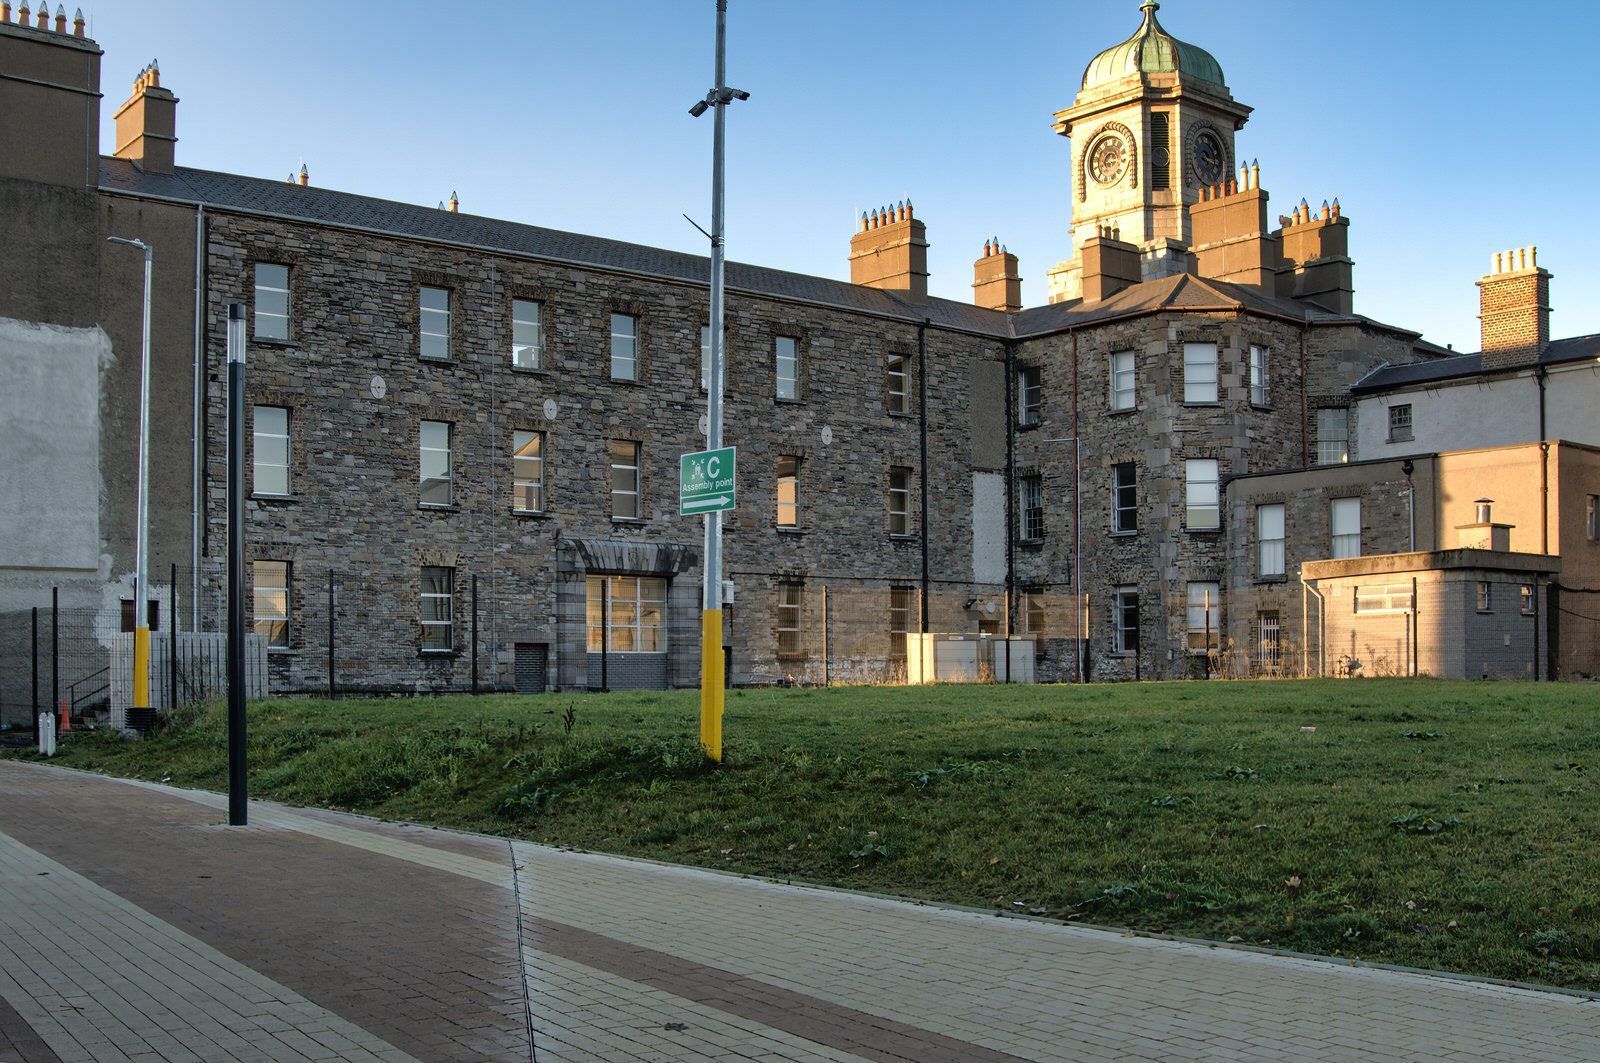 A SUNNY BUT VERY COLD DAY AT THE GRANGEGORMAN UNIVERSITY CAMPUS 044